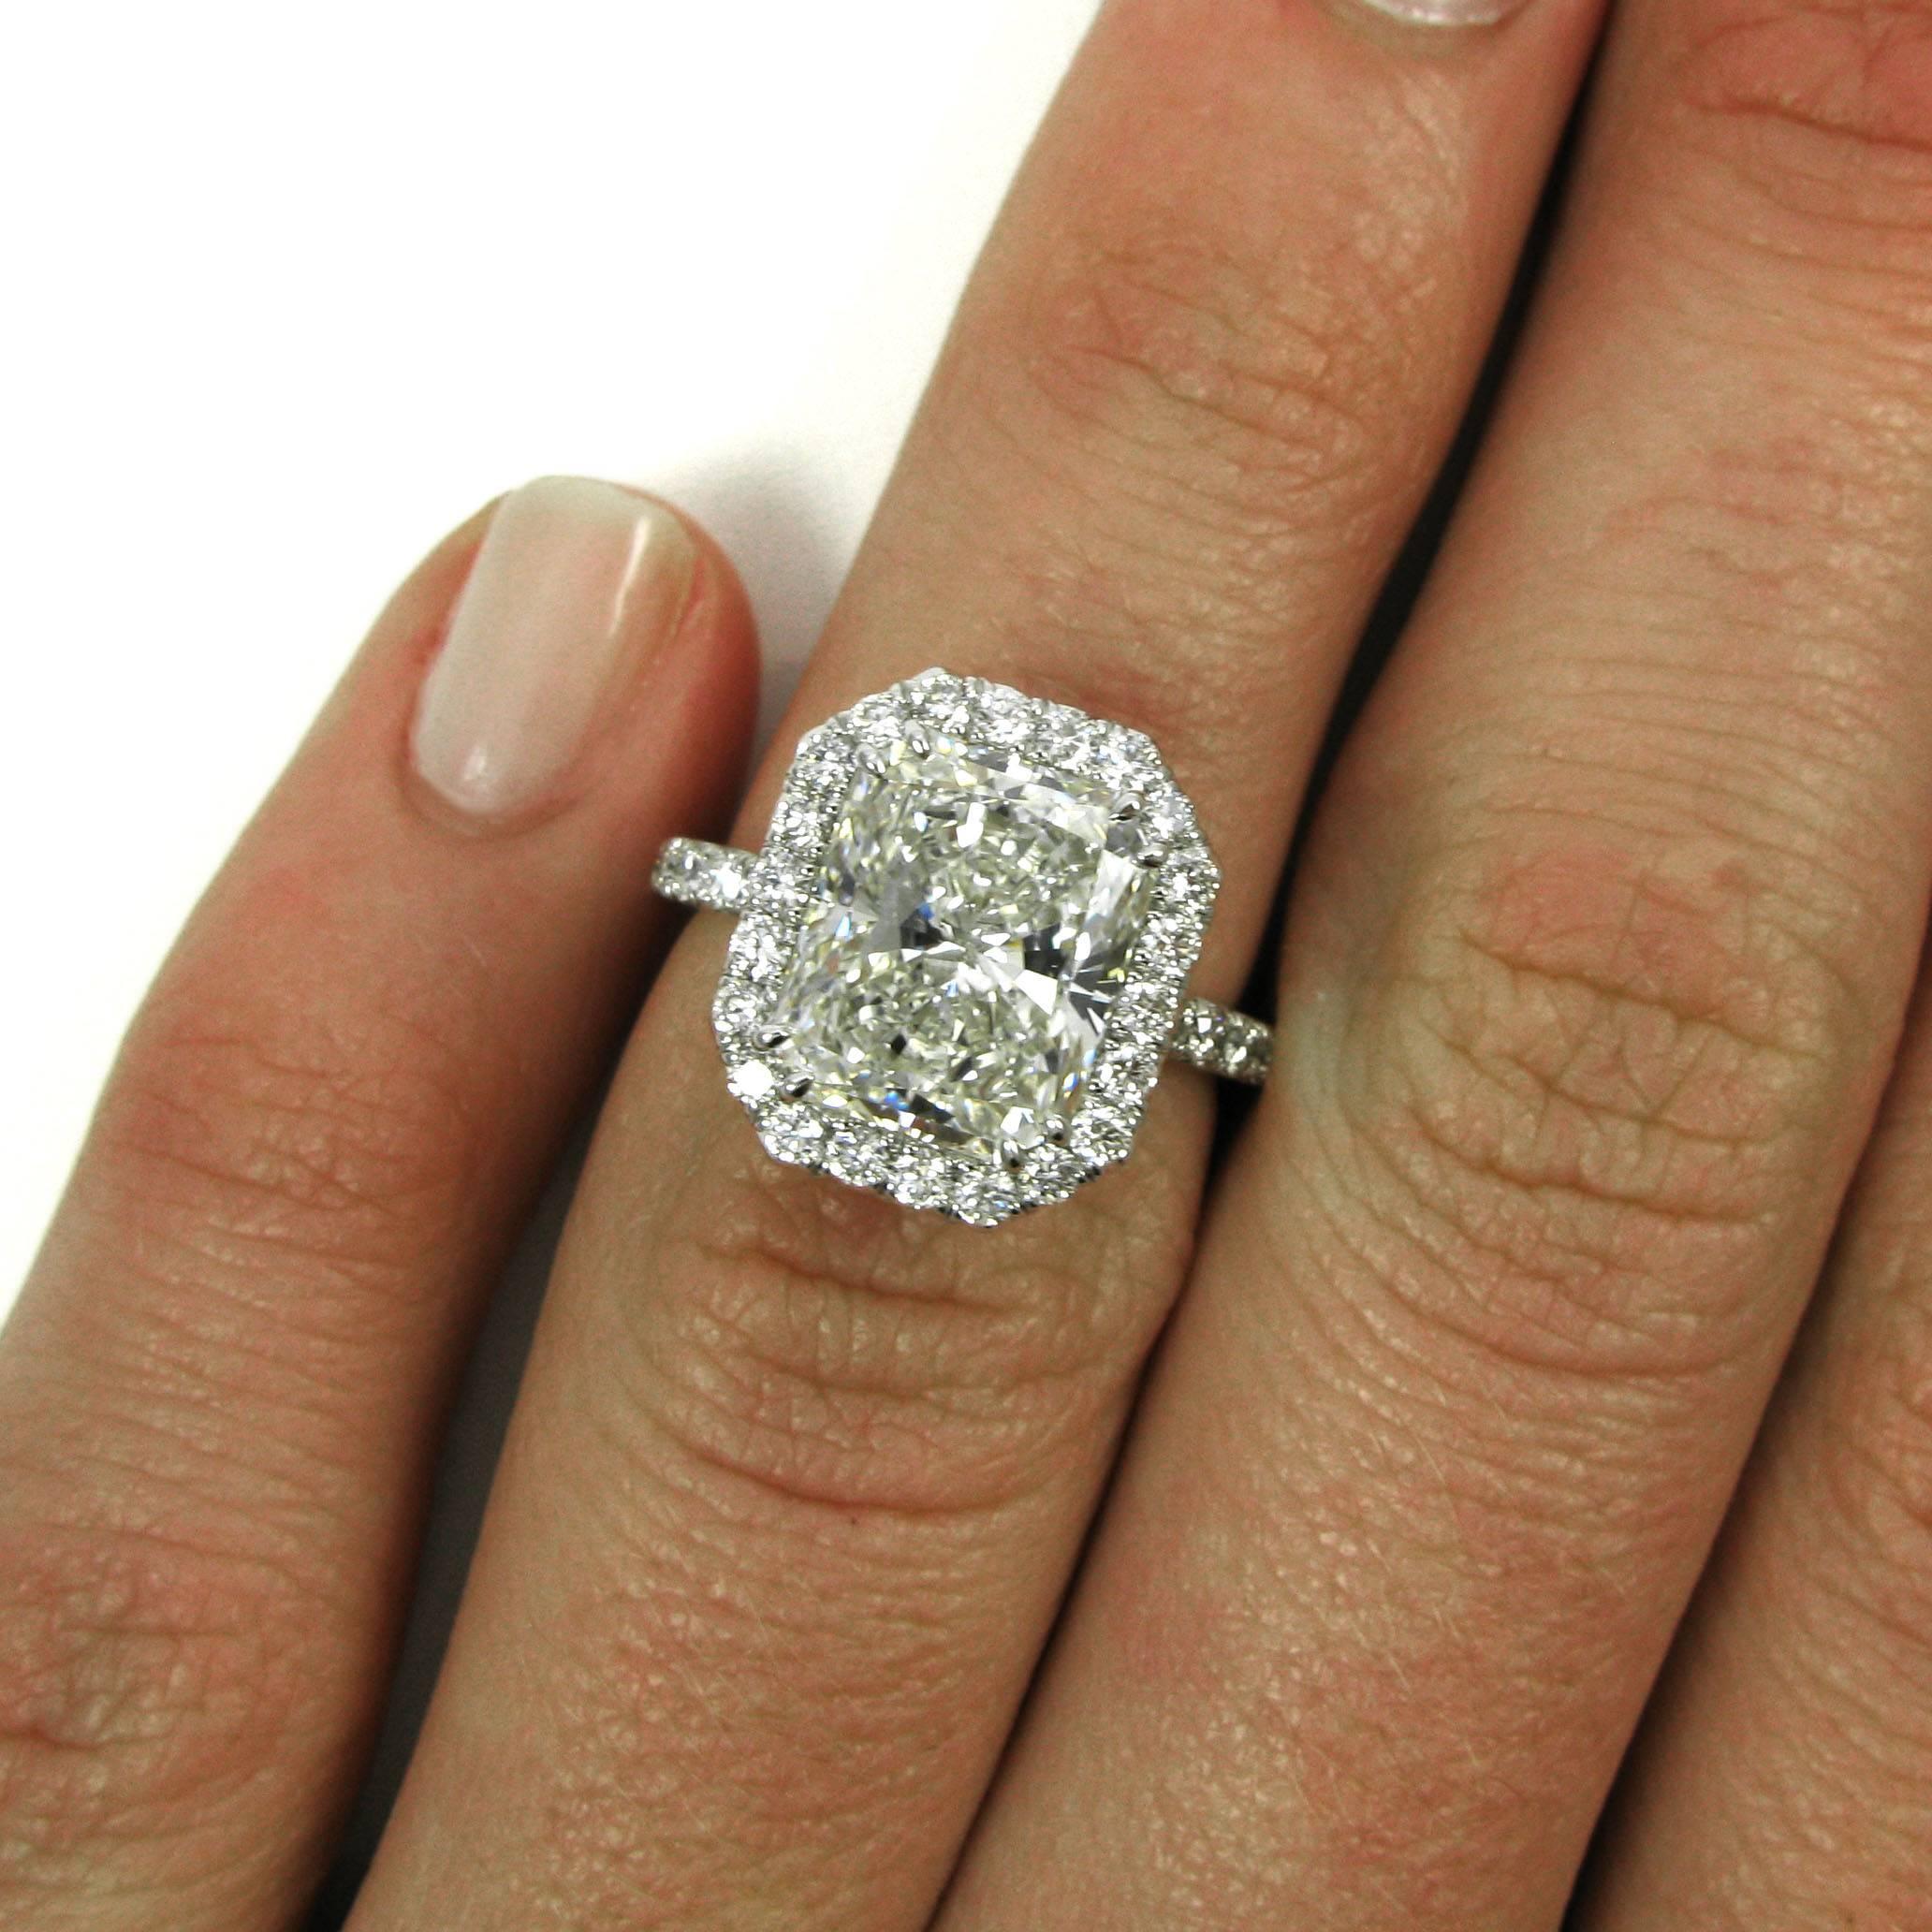 A real showstopper! This 4.04 carat radiant-cut diamond with I color and SI1 clarity is double-prong set into a platinum pave frame mounting studded with approx. 1.00 carat of round pave-set diamonds. 

Purchase includes GIA Diamond Grading Report